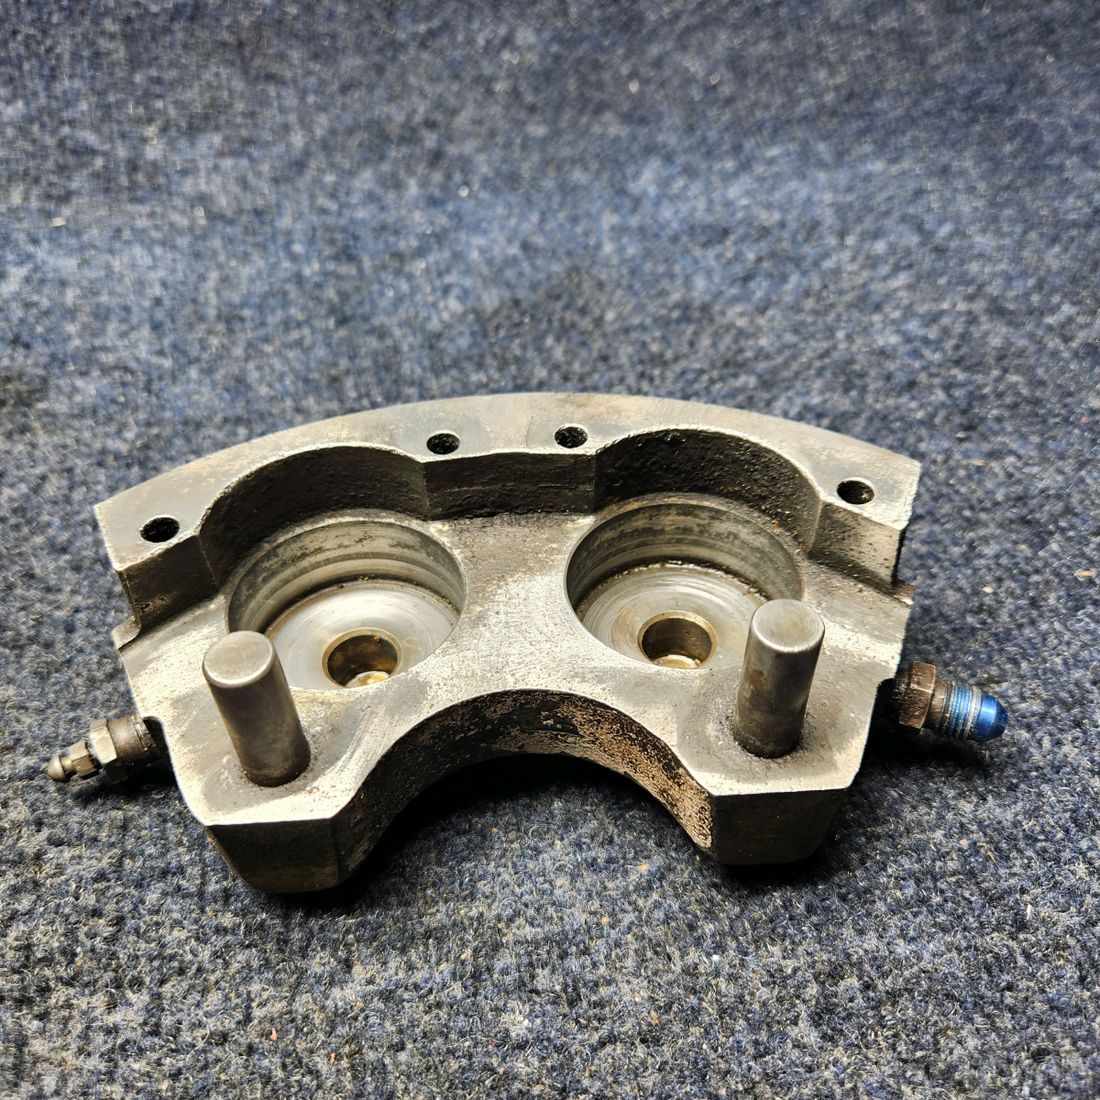 Used aircraft parts for sale, 30-83A Cleveland Piper PA32RT-300 BRAKE CALIPER ASSEMBLY LH OR RH